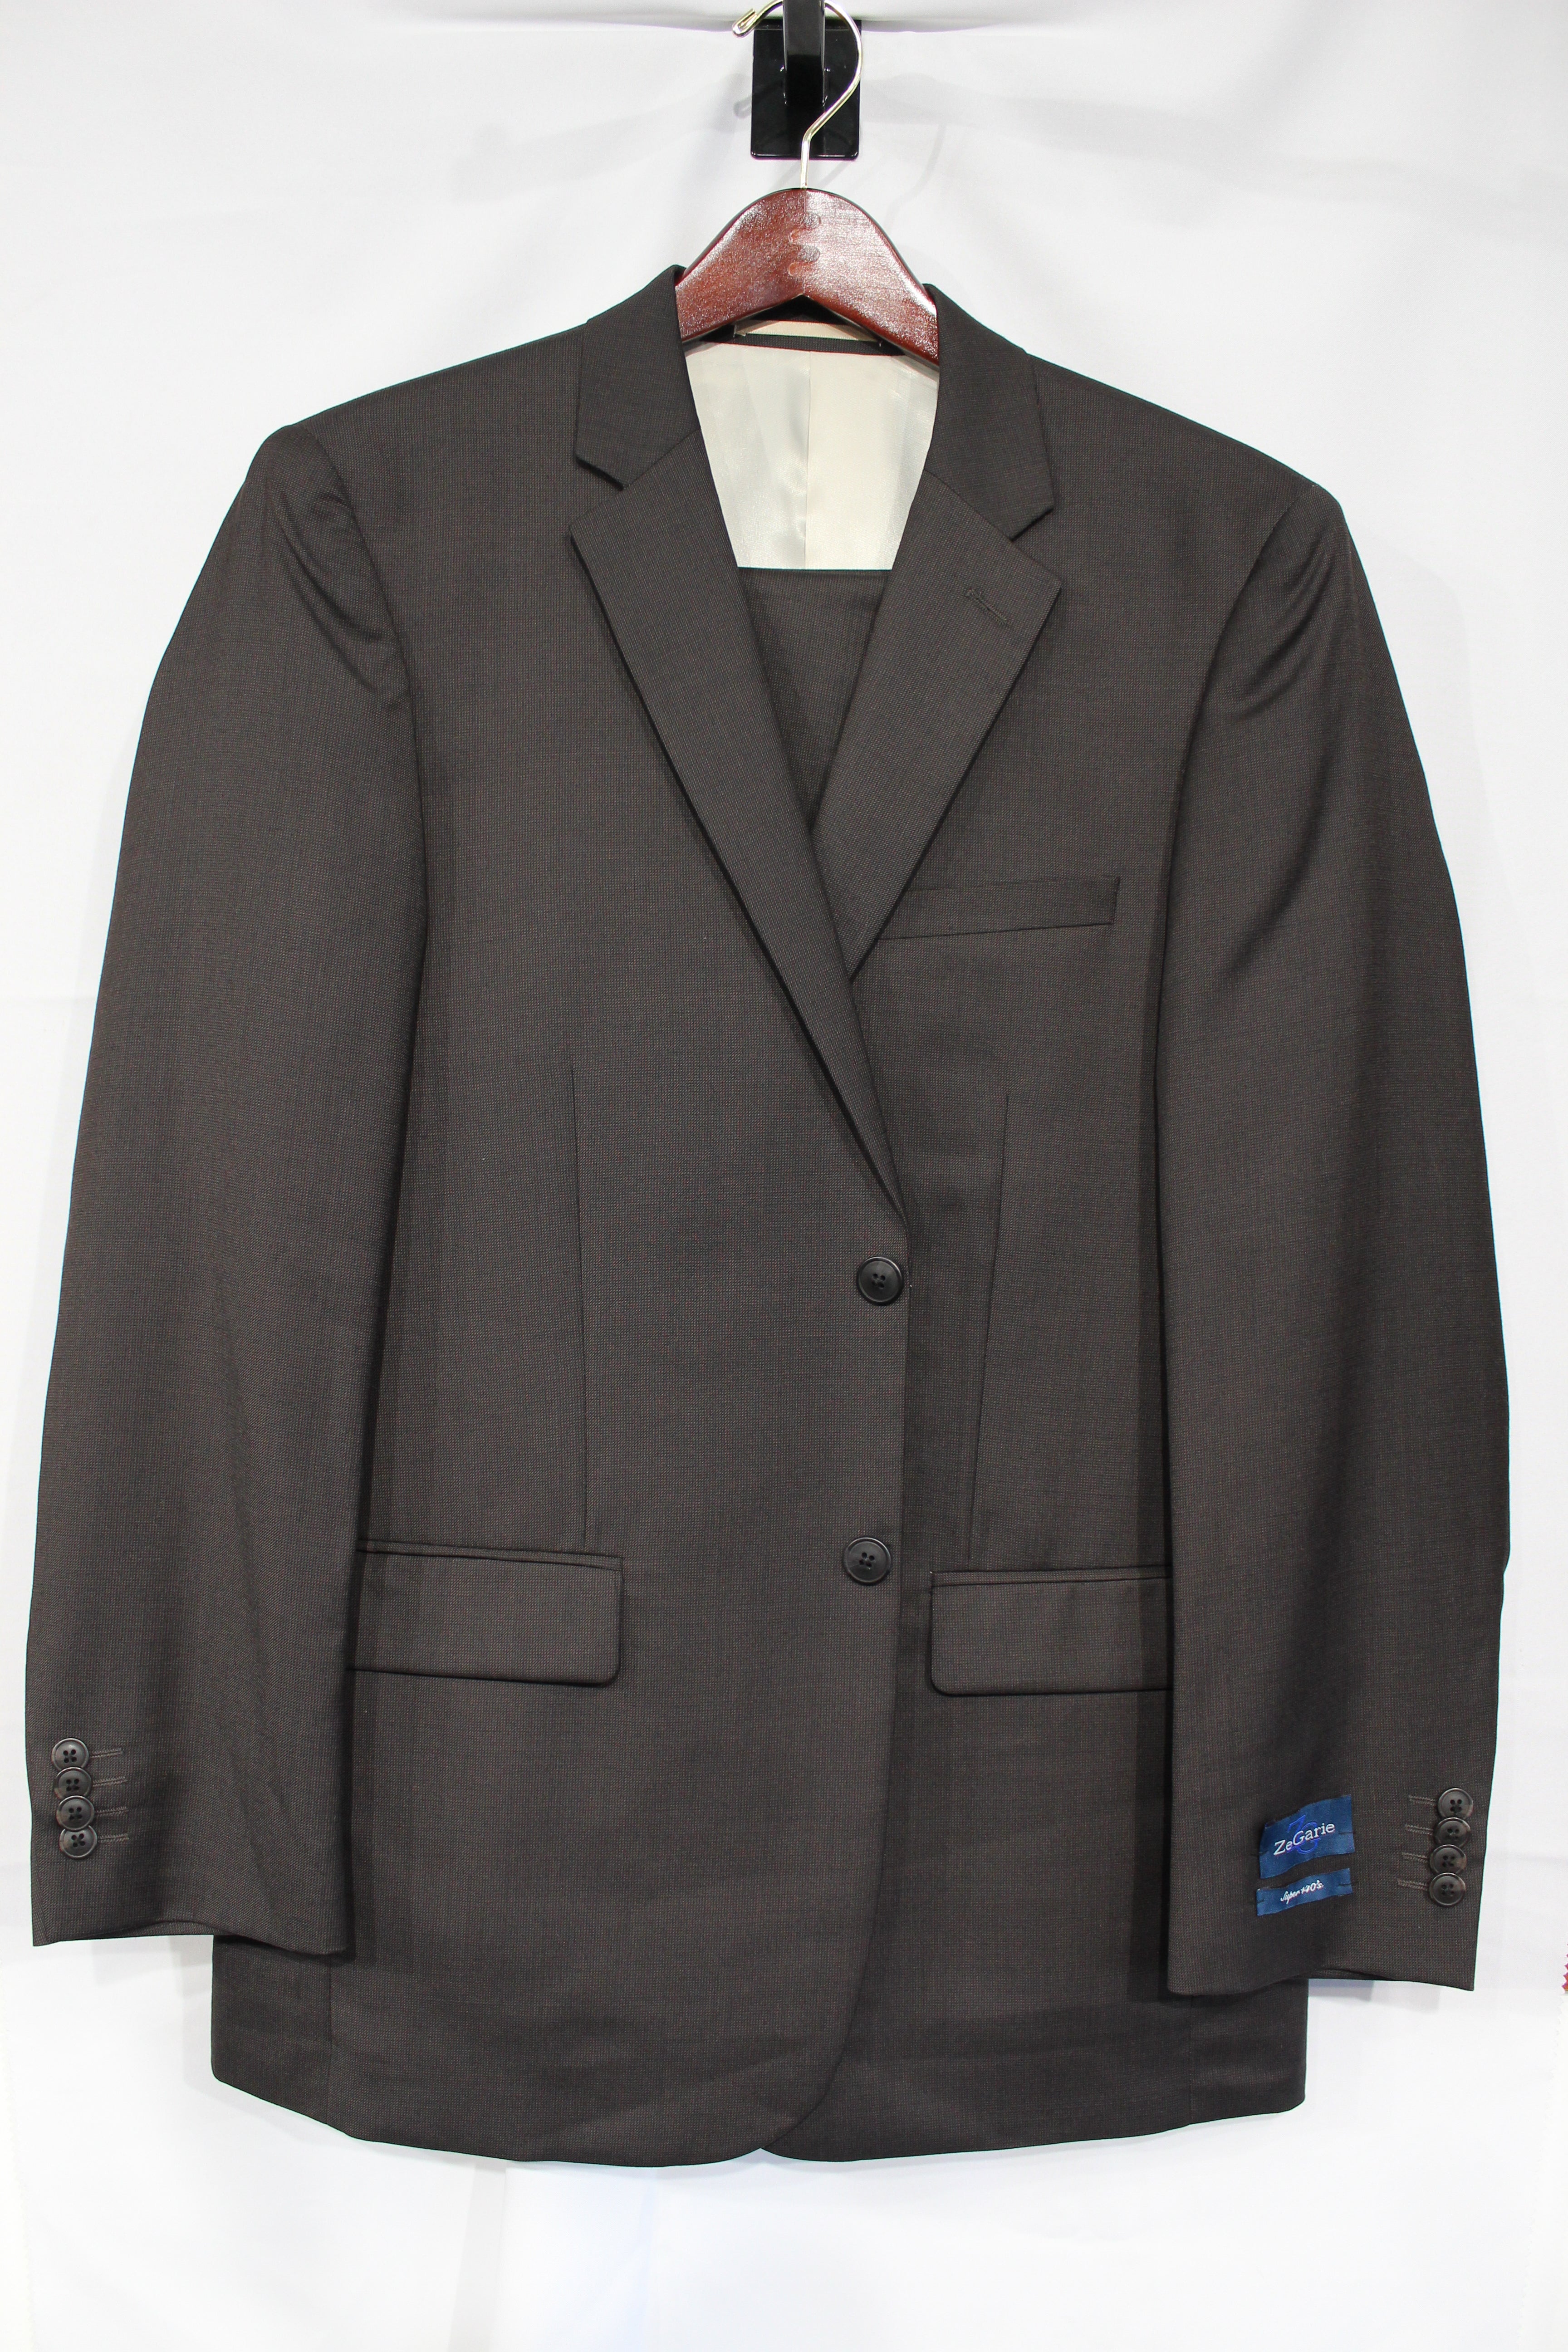 Brown Birdseye Suit For Men Wool Suits For All Ocassions MW116